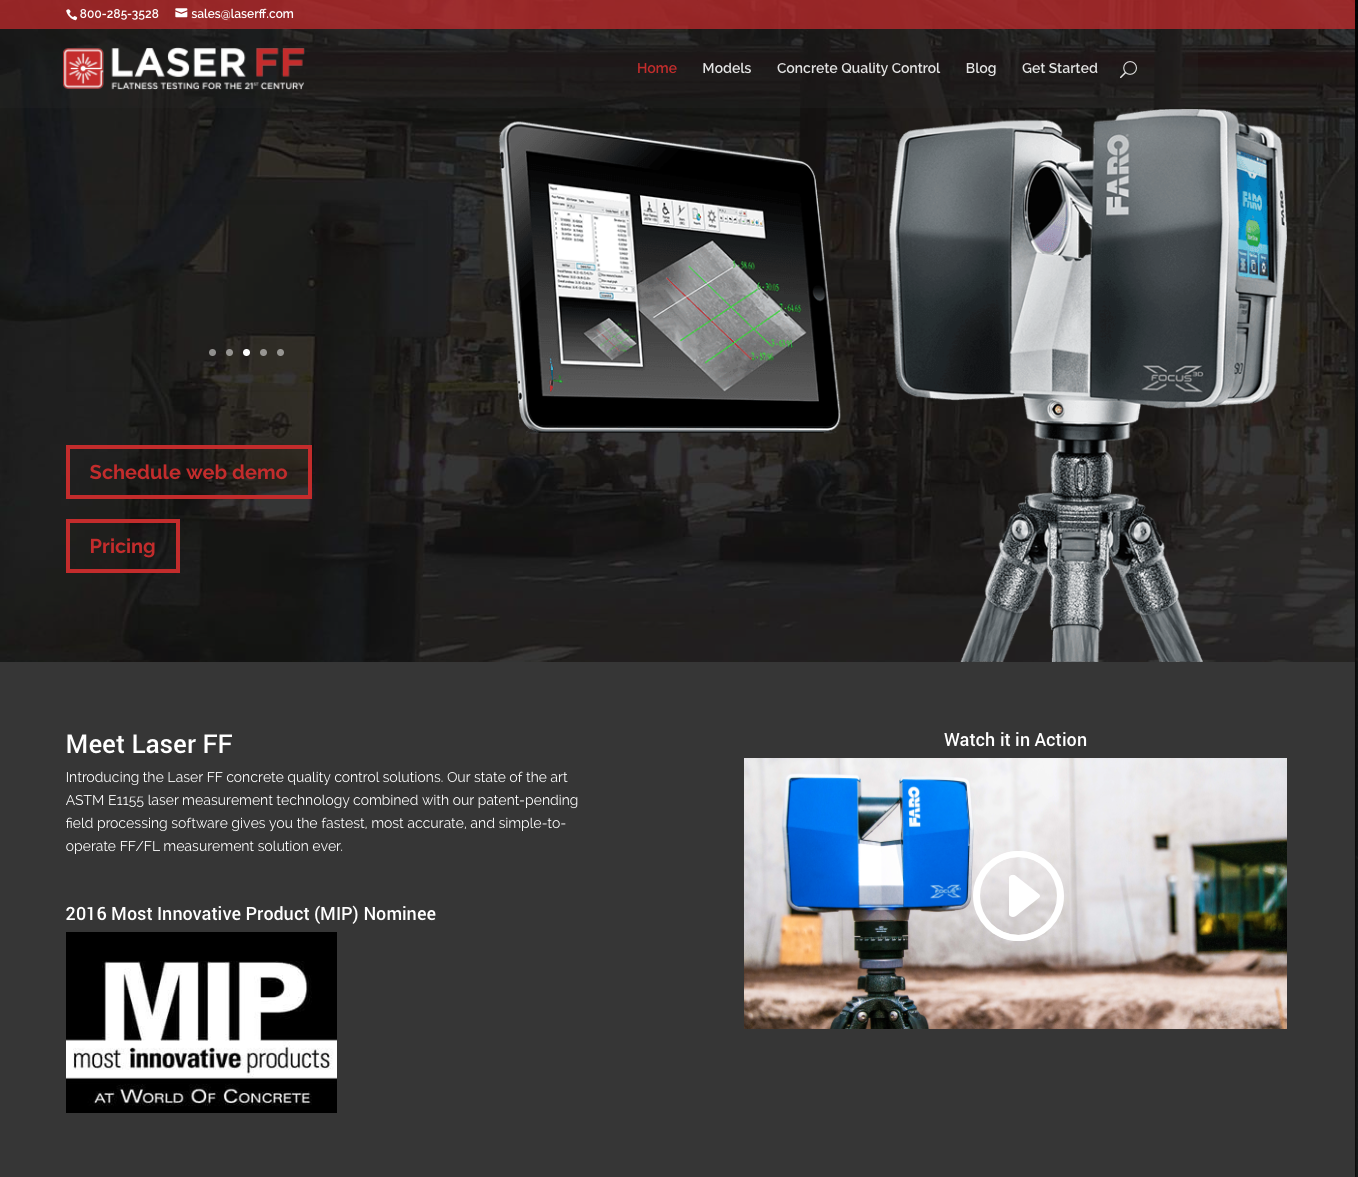 Laser FF Home Page